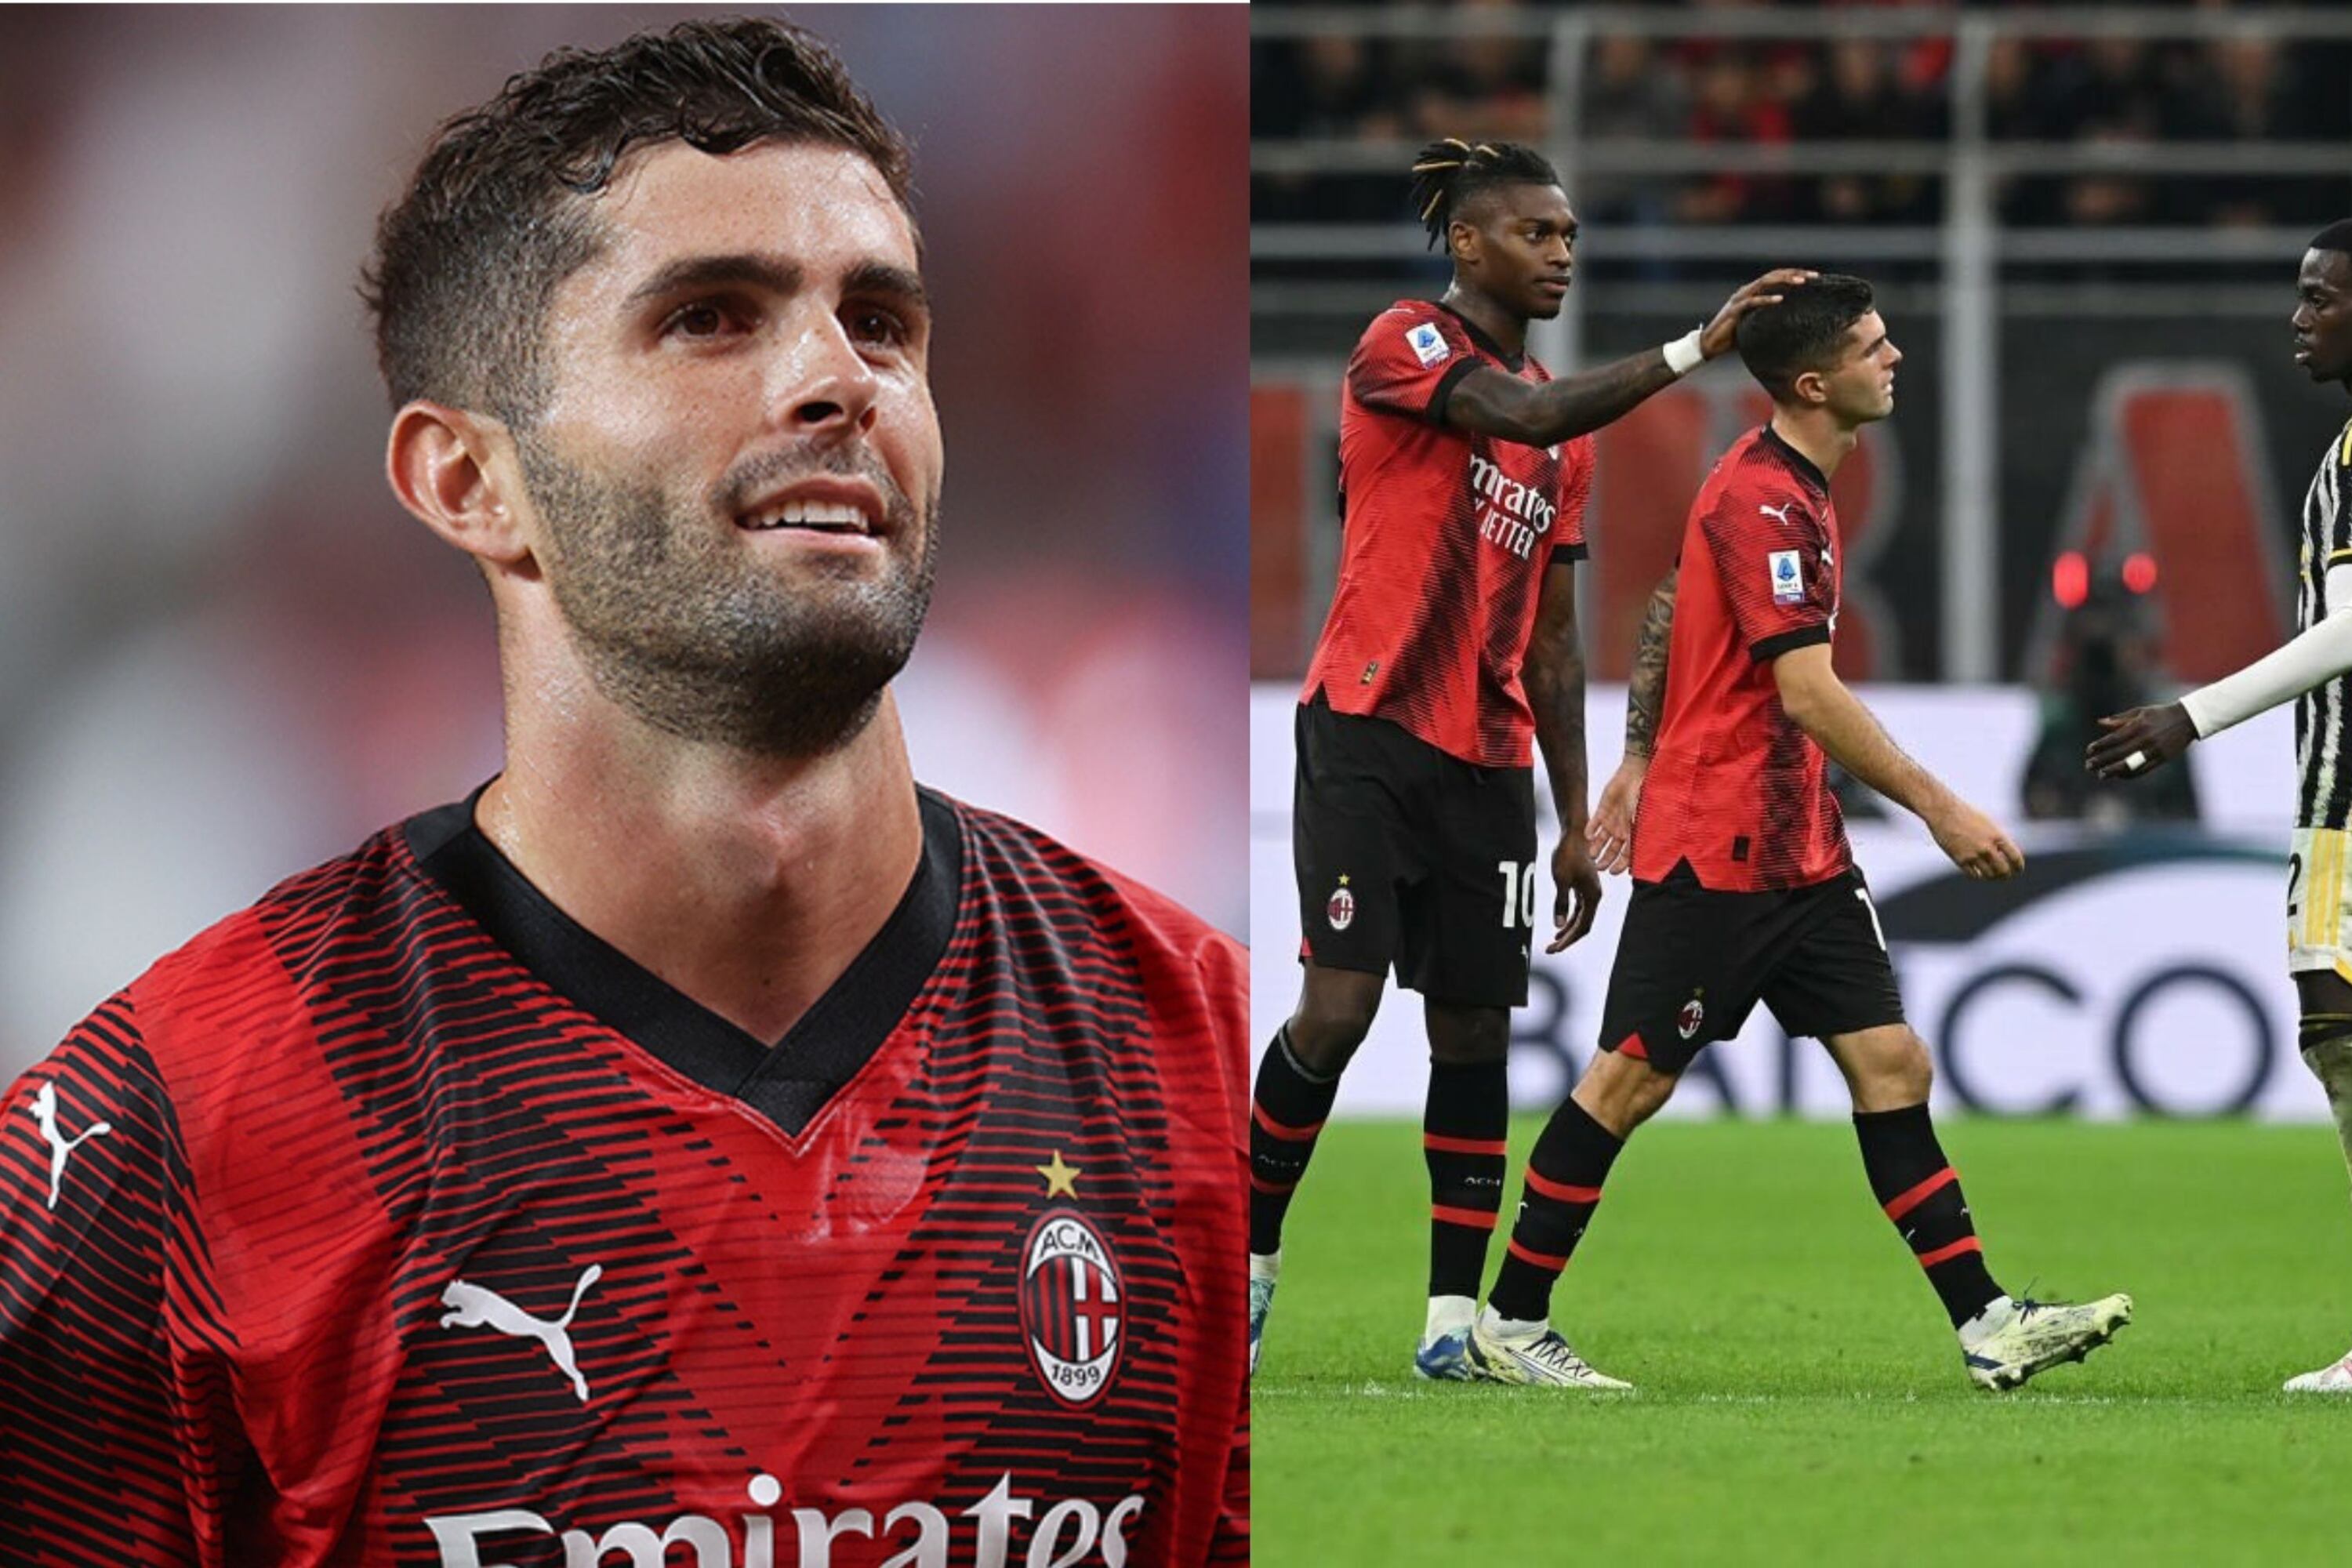 The reaction of AC Milan fans after Pulisic's disappointing match against Juventus